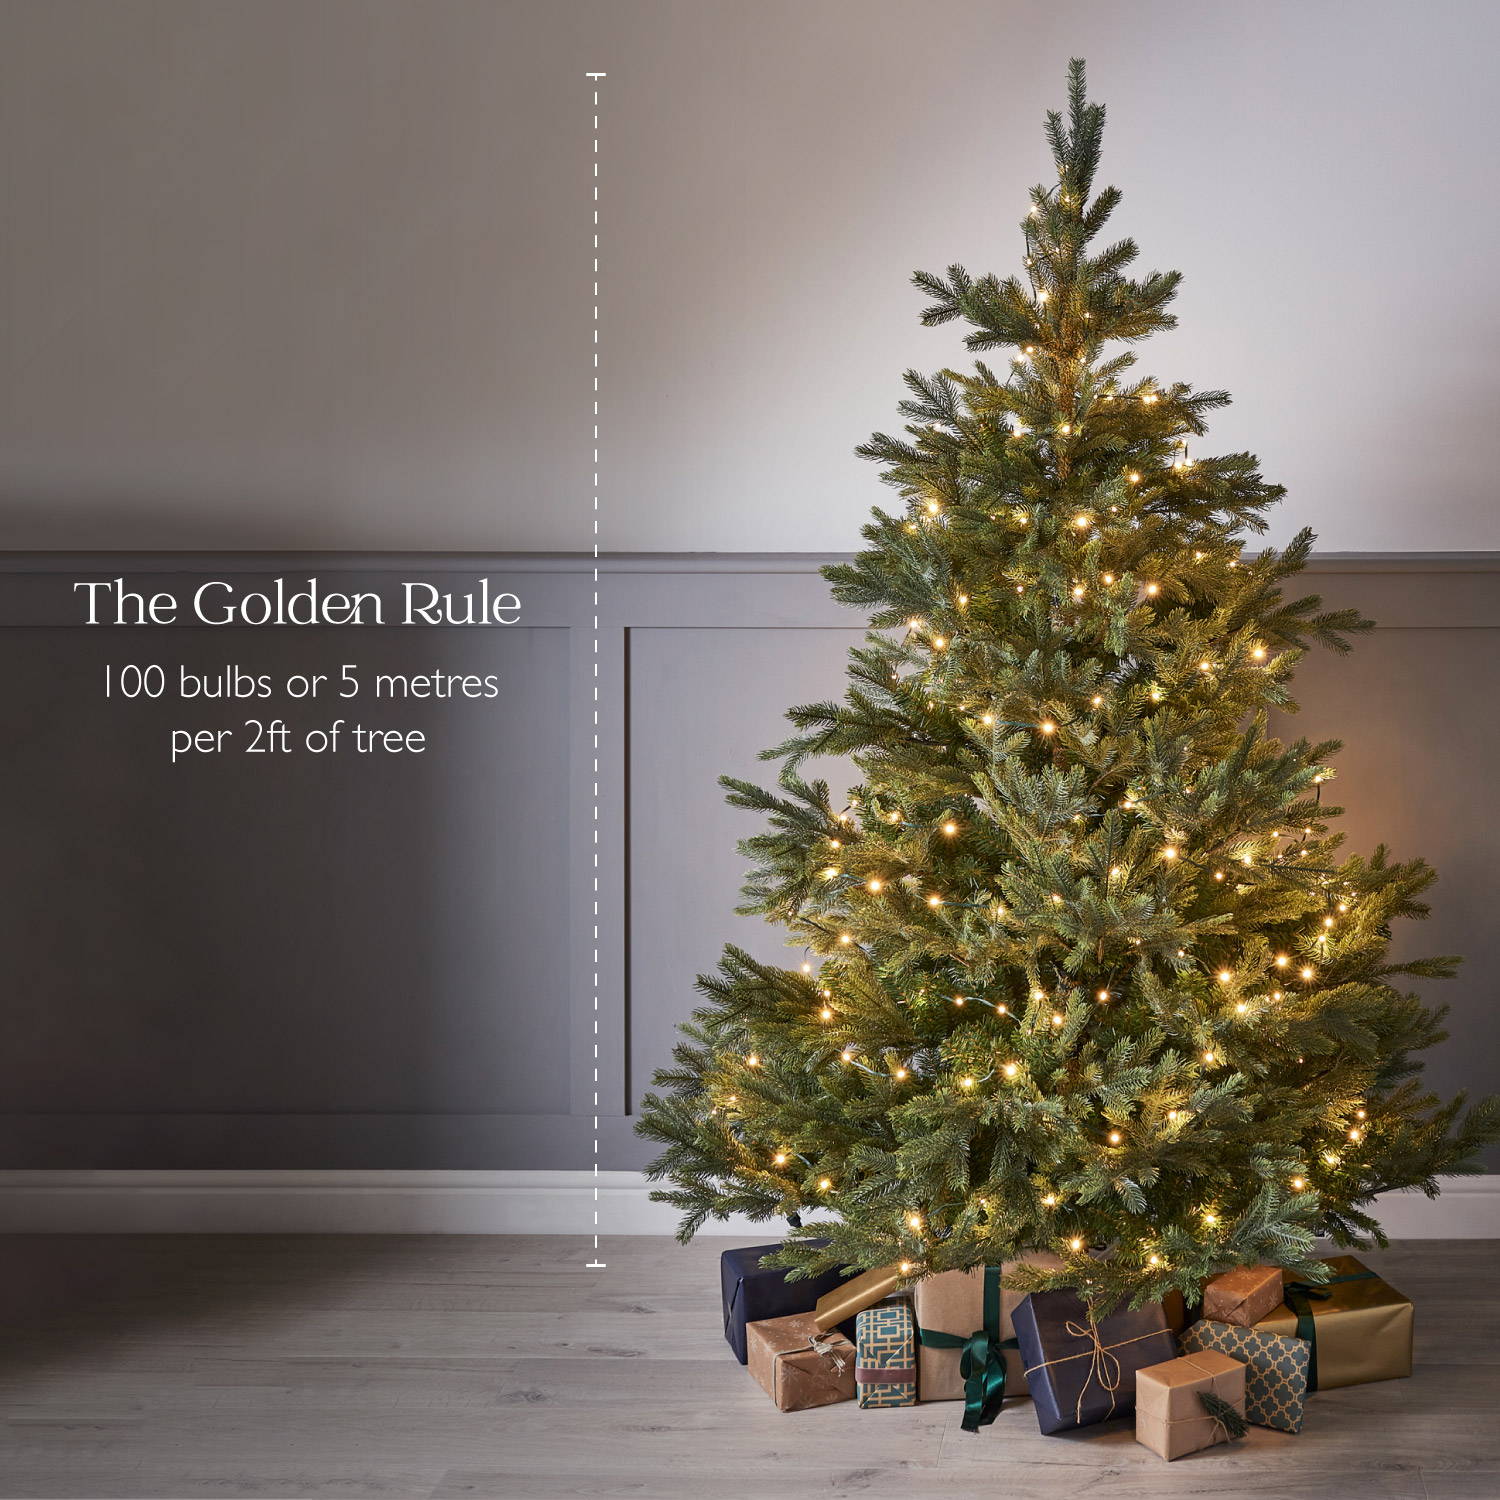 Golden Rule - 100 bulbs of 5m of lights per 2ft of tree. An artificial Christmas Tree dressed with warm white Christmas trees and presents wrapped underneath.